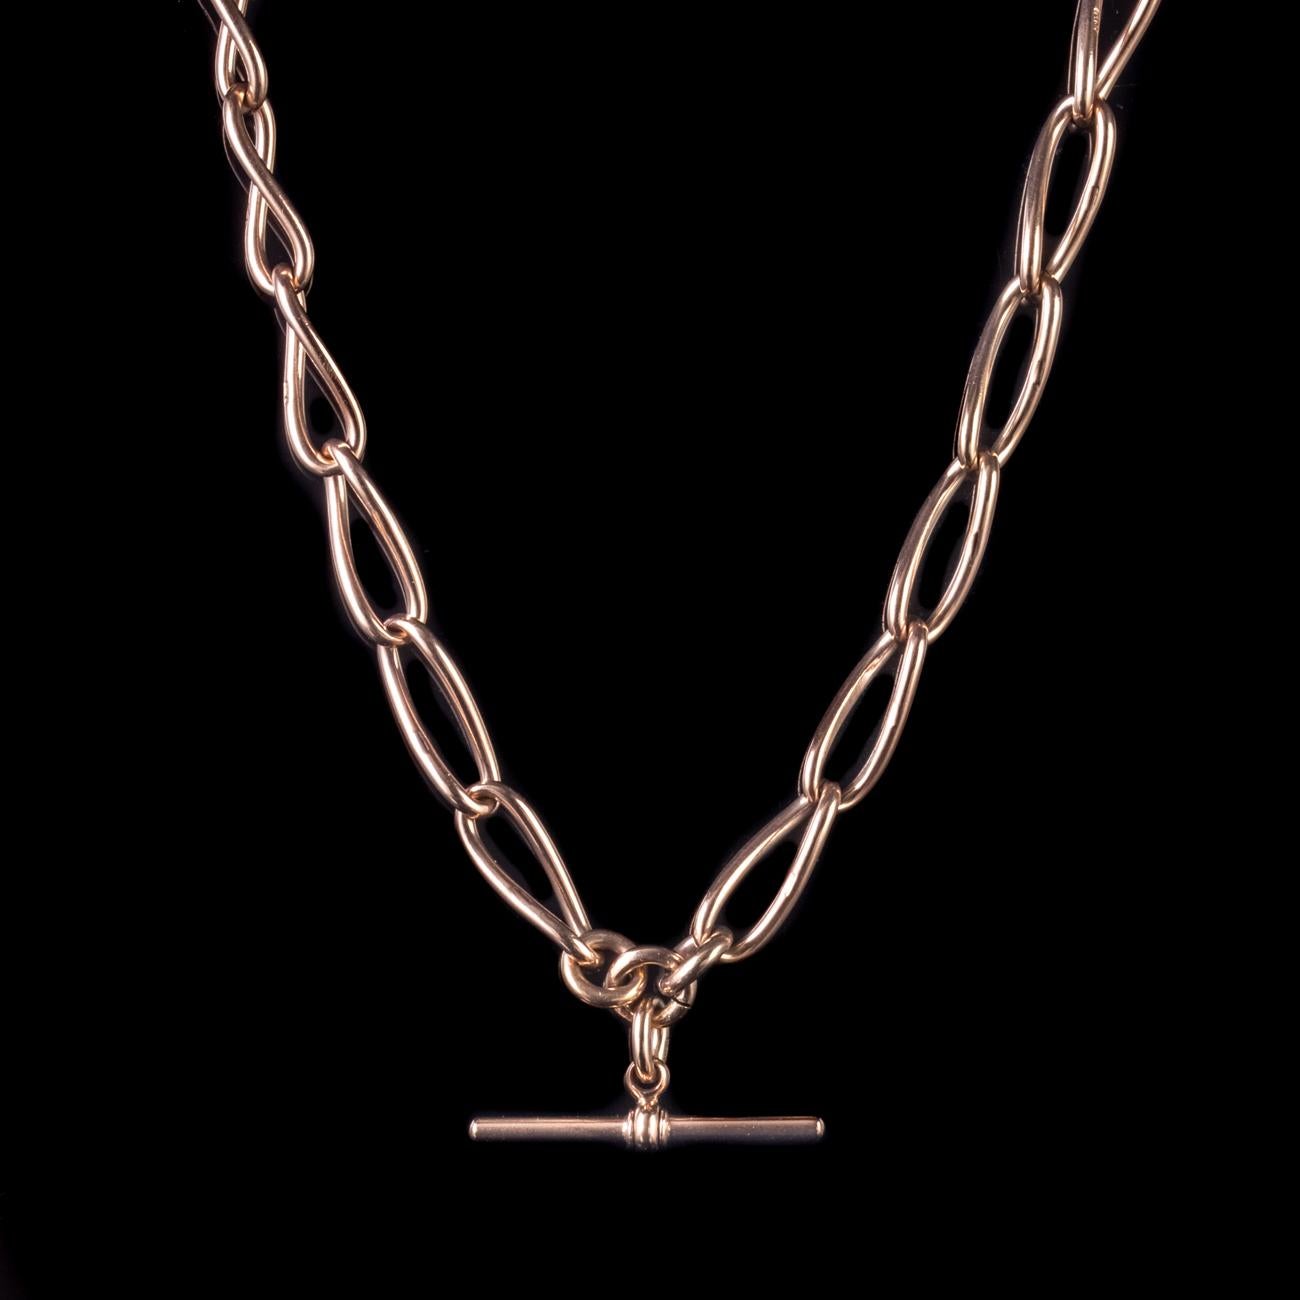 This beautiful Antique Victorian Albert chain necklace has been lovingly crafted in 9ct Rose Gold and features a decorative T bar. 

Each link is solid and durable with a 9ct stamp upon each. It is fitted with a secure ring clasp and trigger clasp